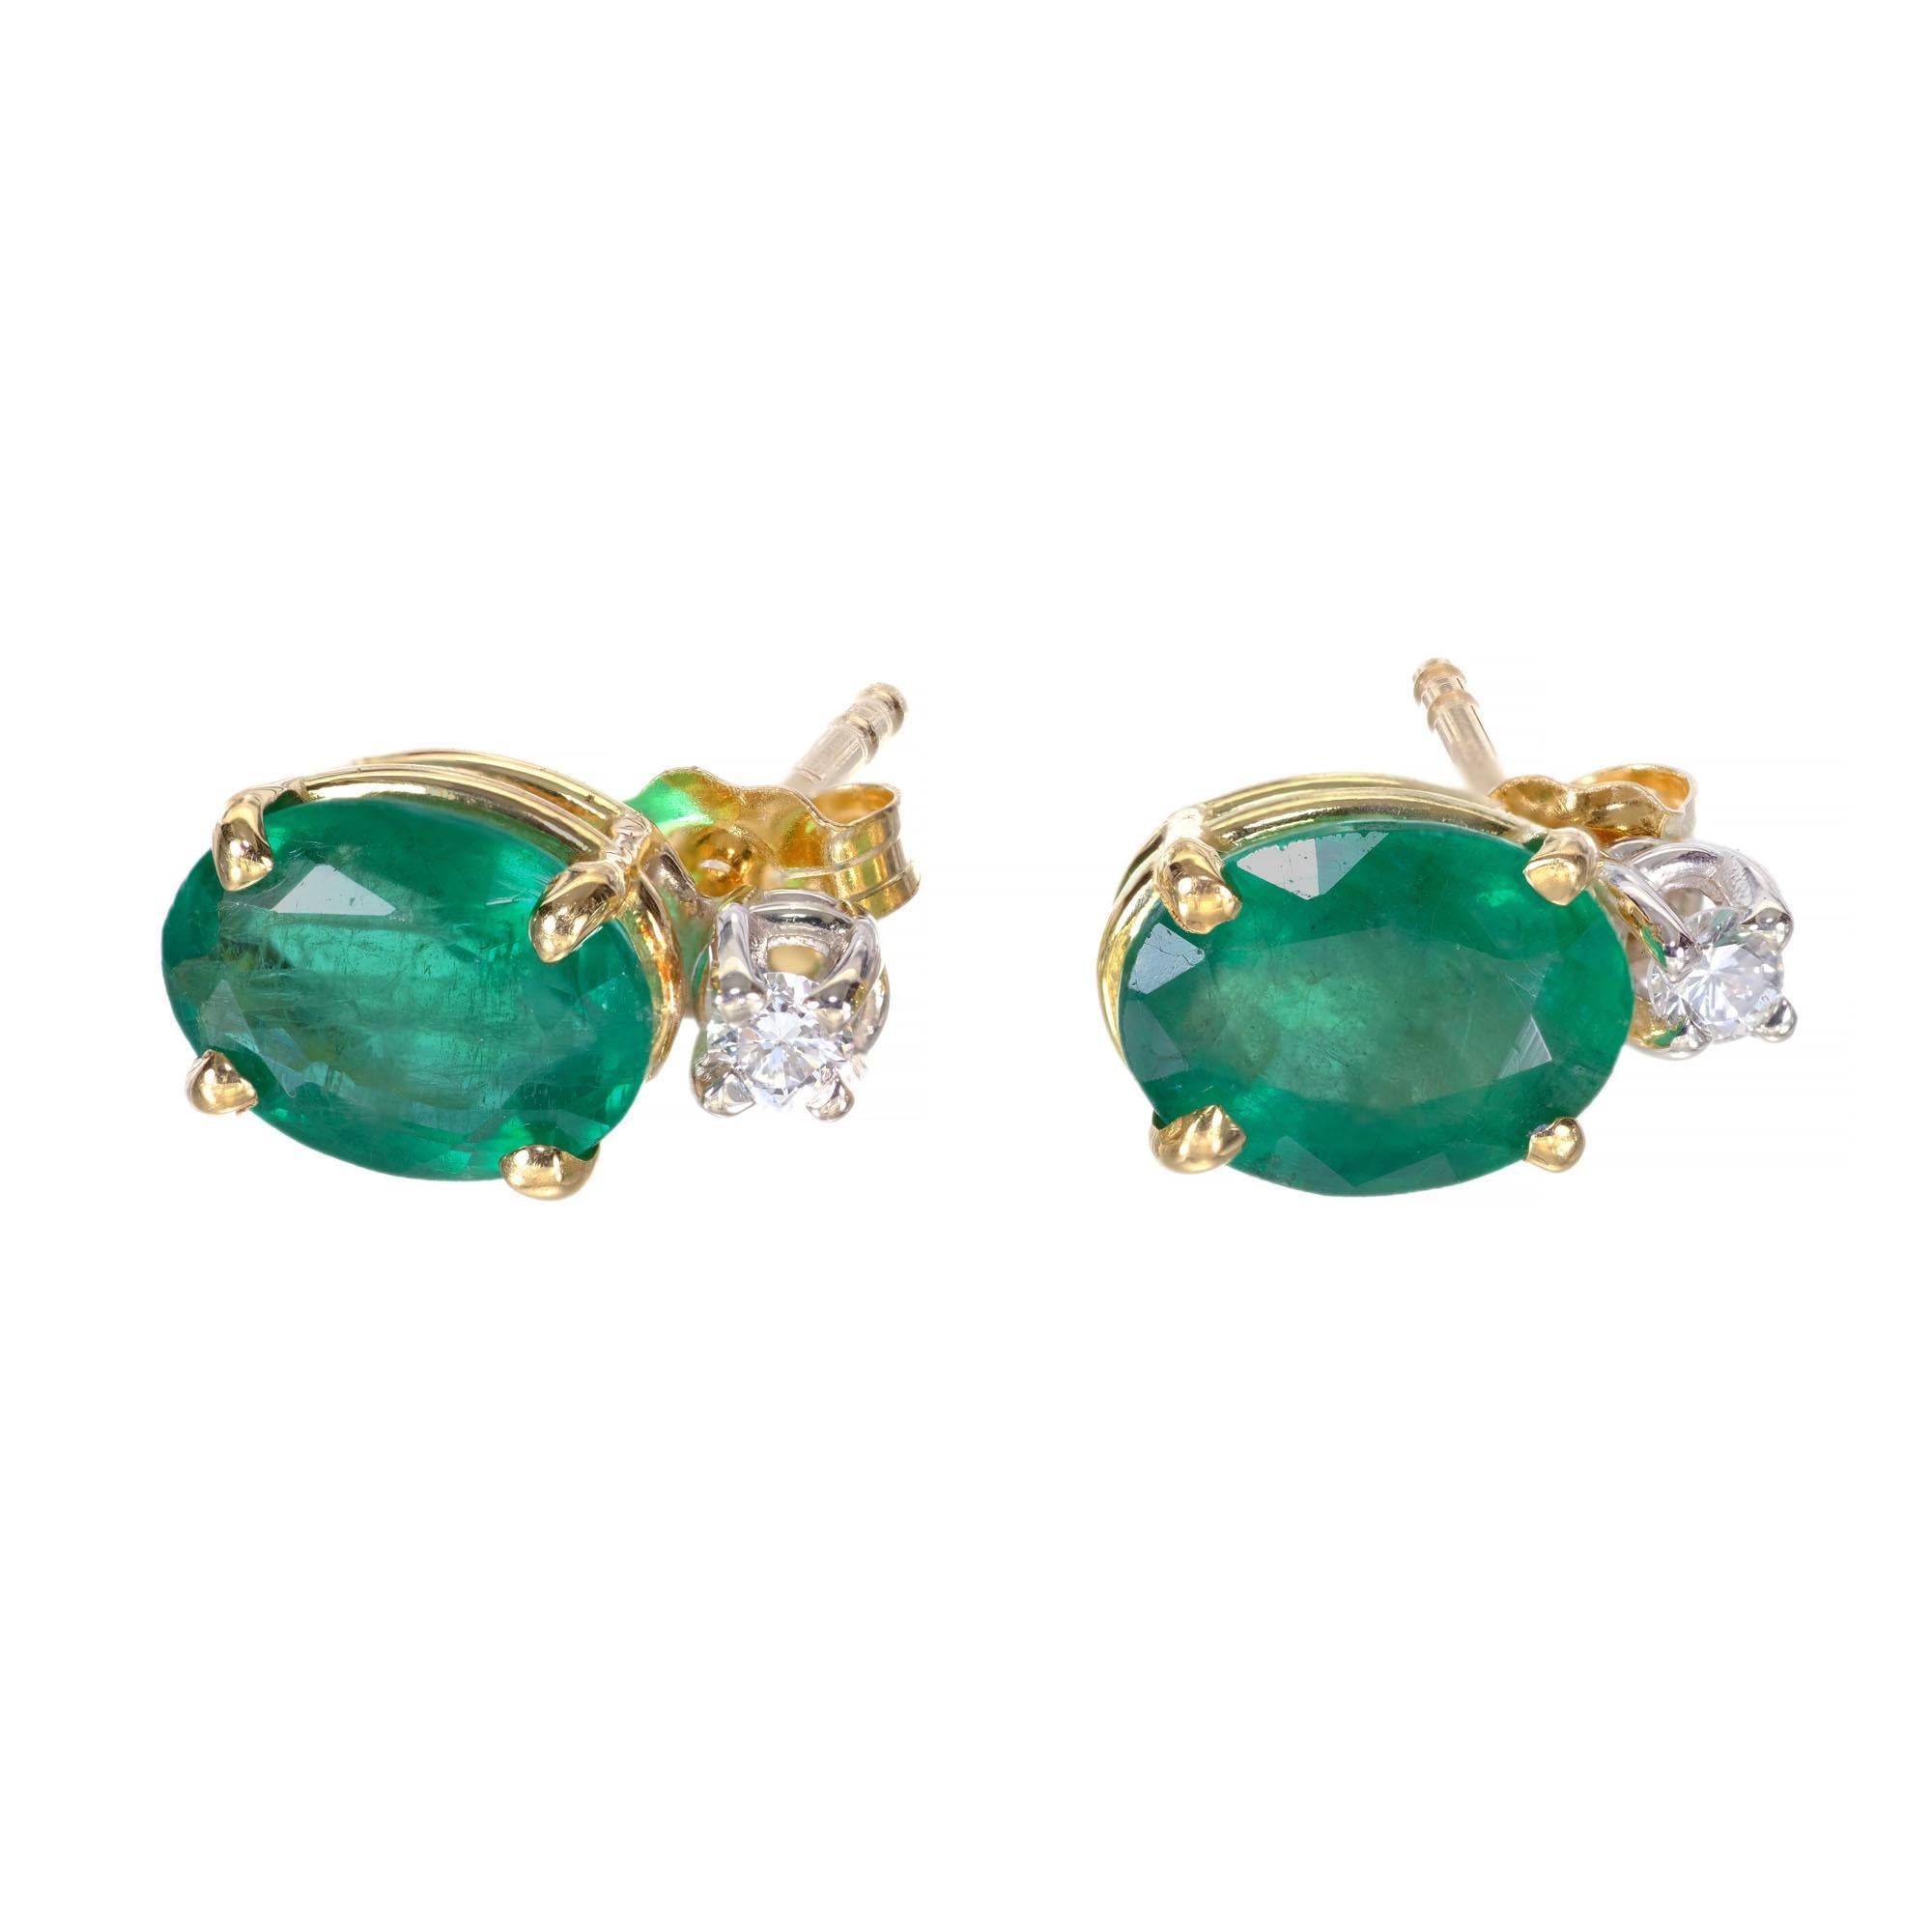 Simple 18k yellow and white gold basket earrings from the Peter Suchy Workshop set with two oval Emeralds and two round accent diamonds. 

2 oval Emeralds approx. total weight 2.25cts
2 round diamonds approx. total weight .03cts, G, VS
18k Yellow